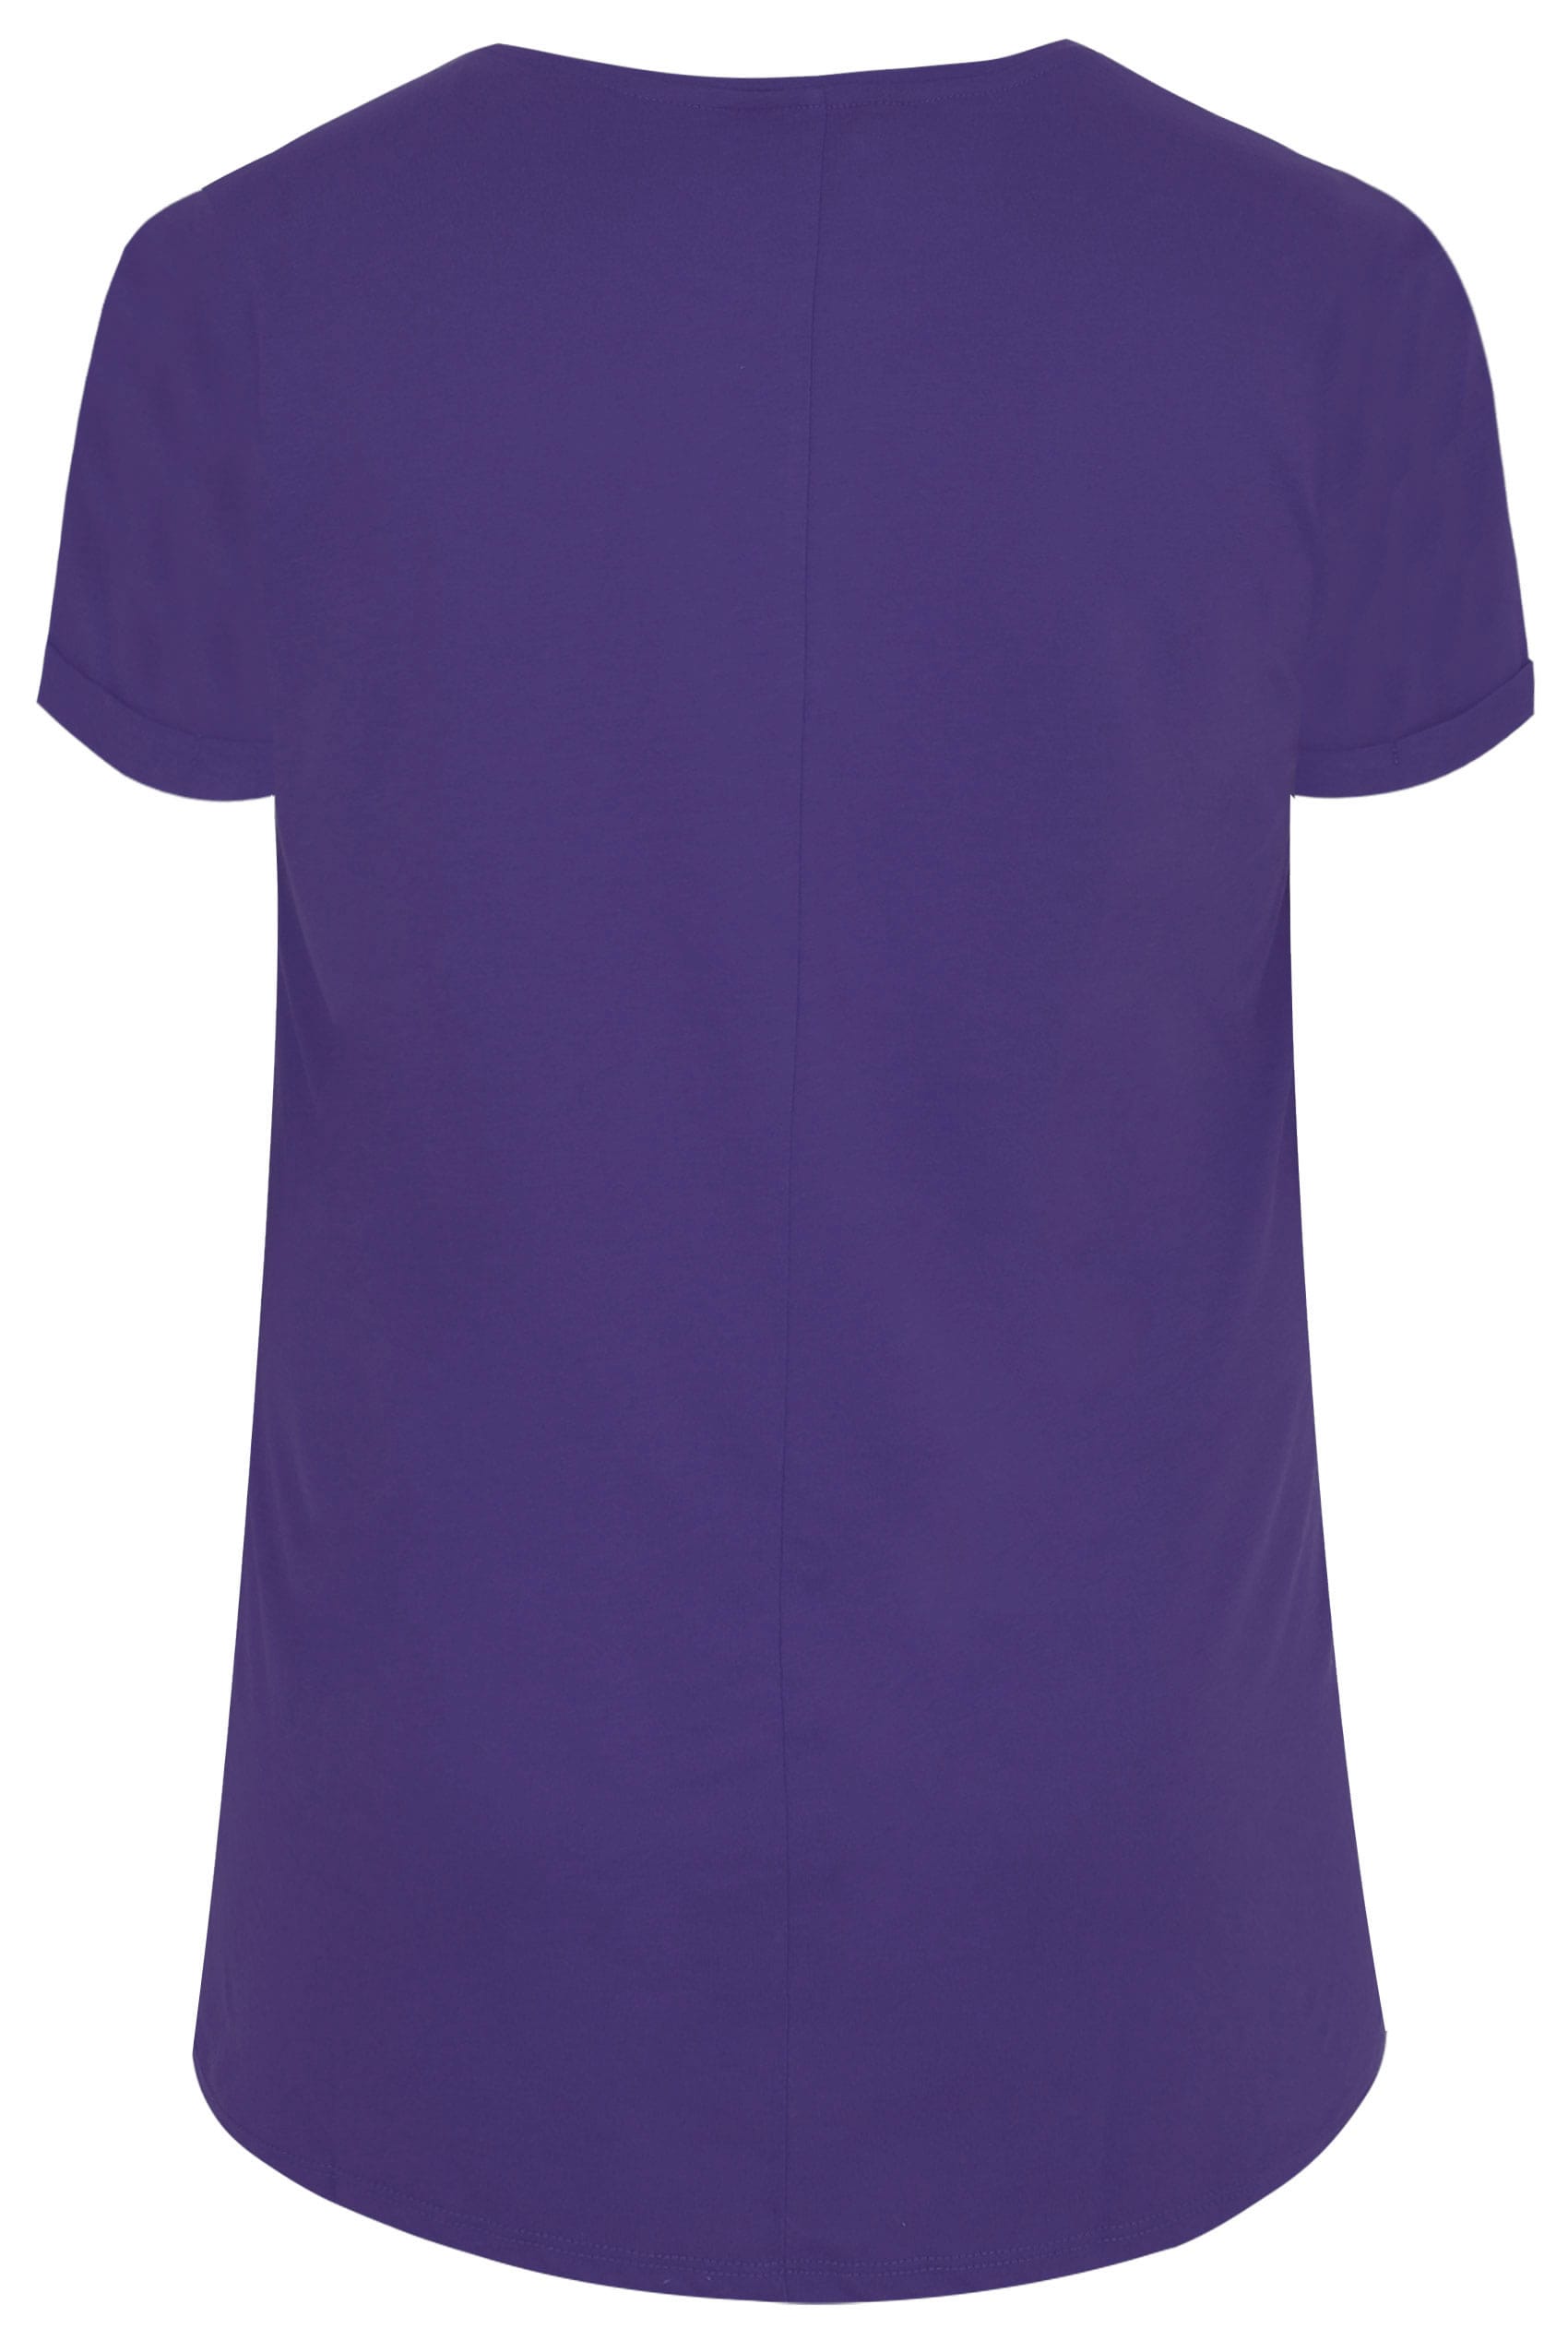 Purple Pocket T-Shirt With Curved Hem, Plus size 16 to 36